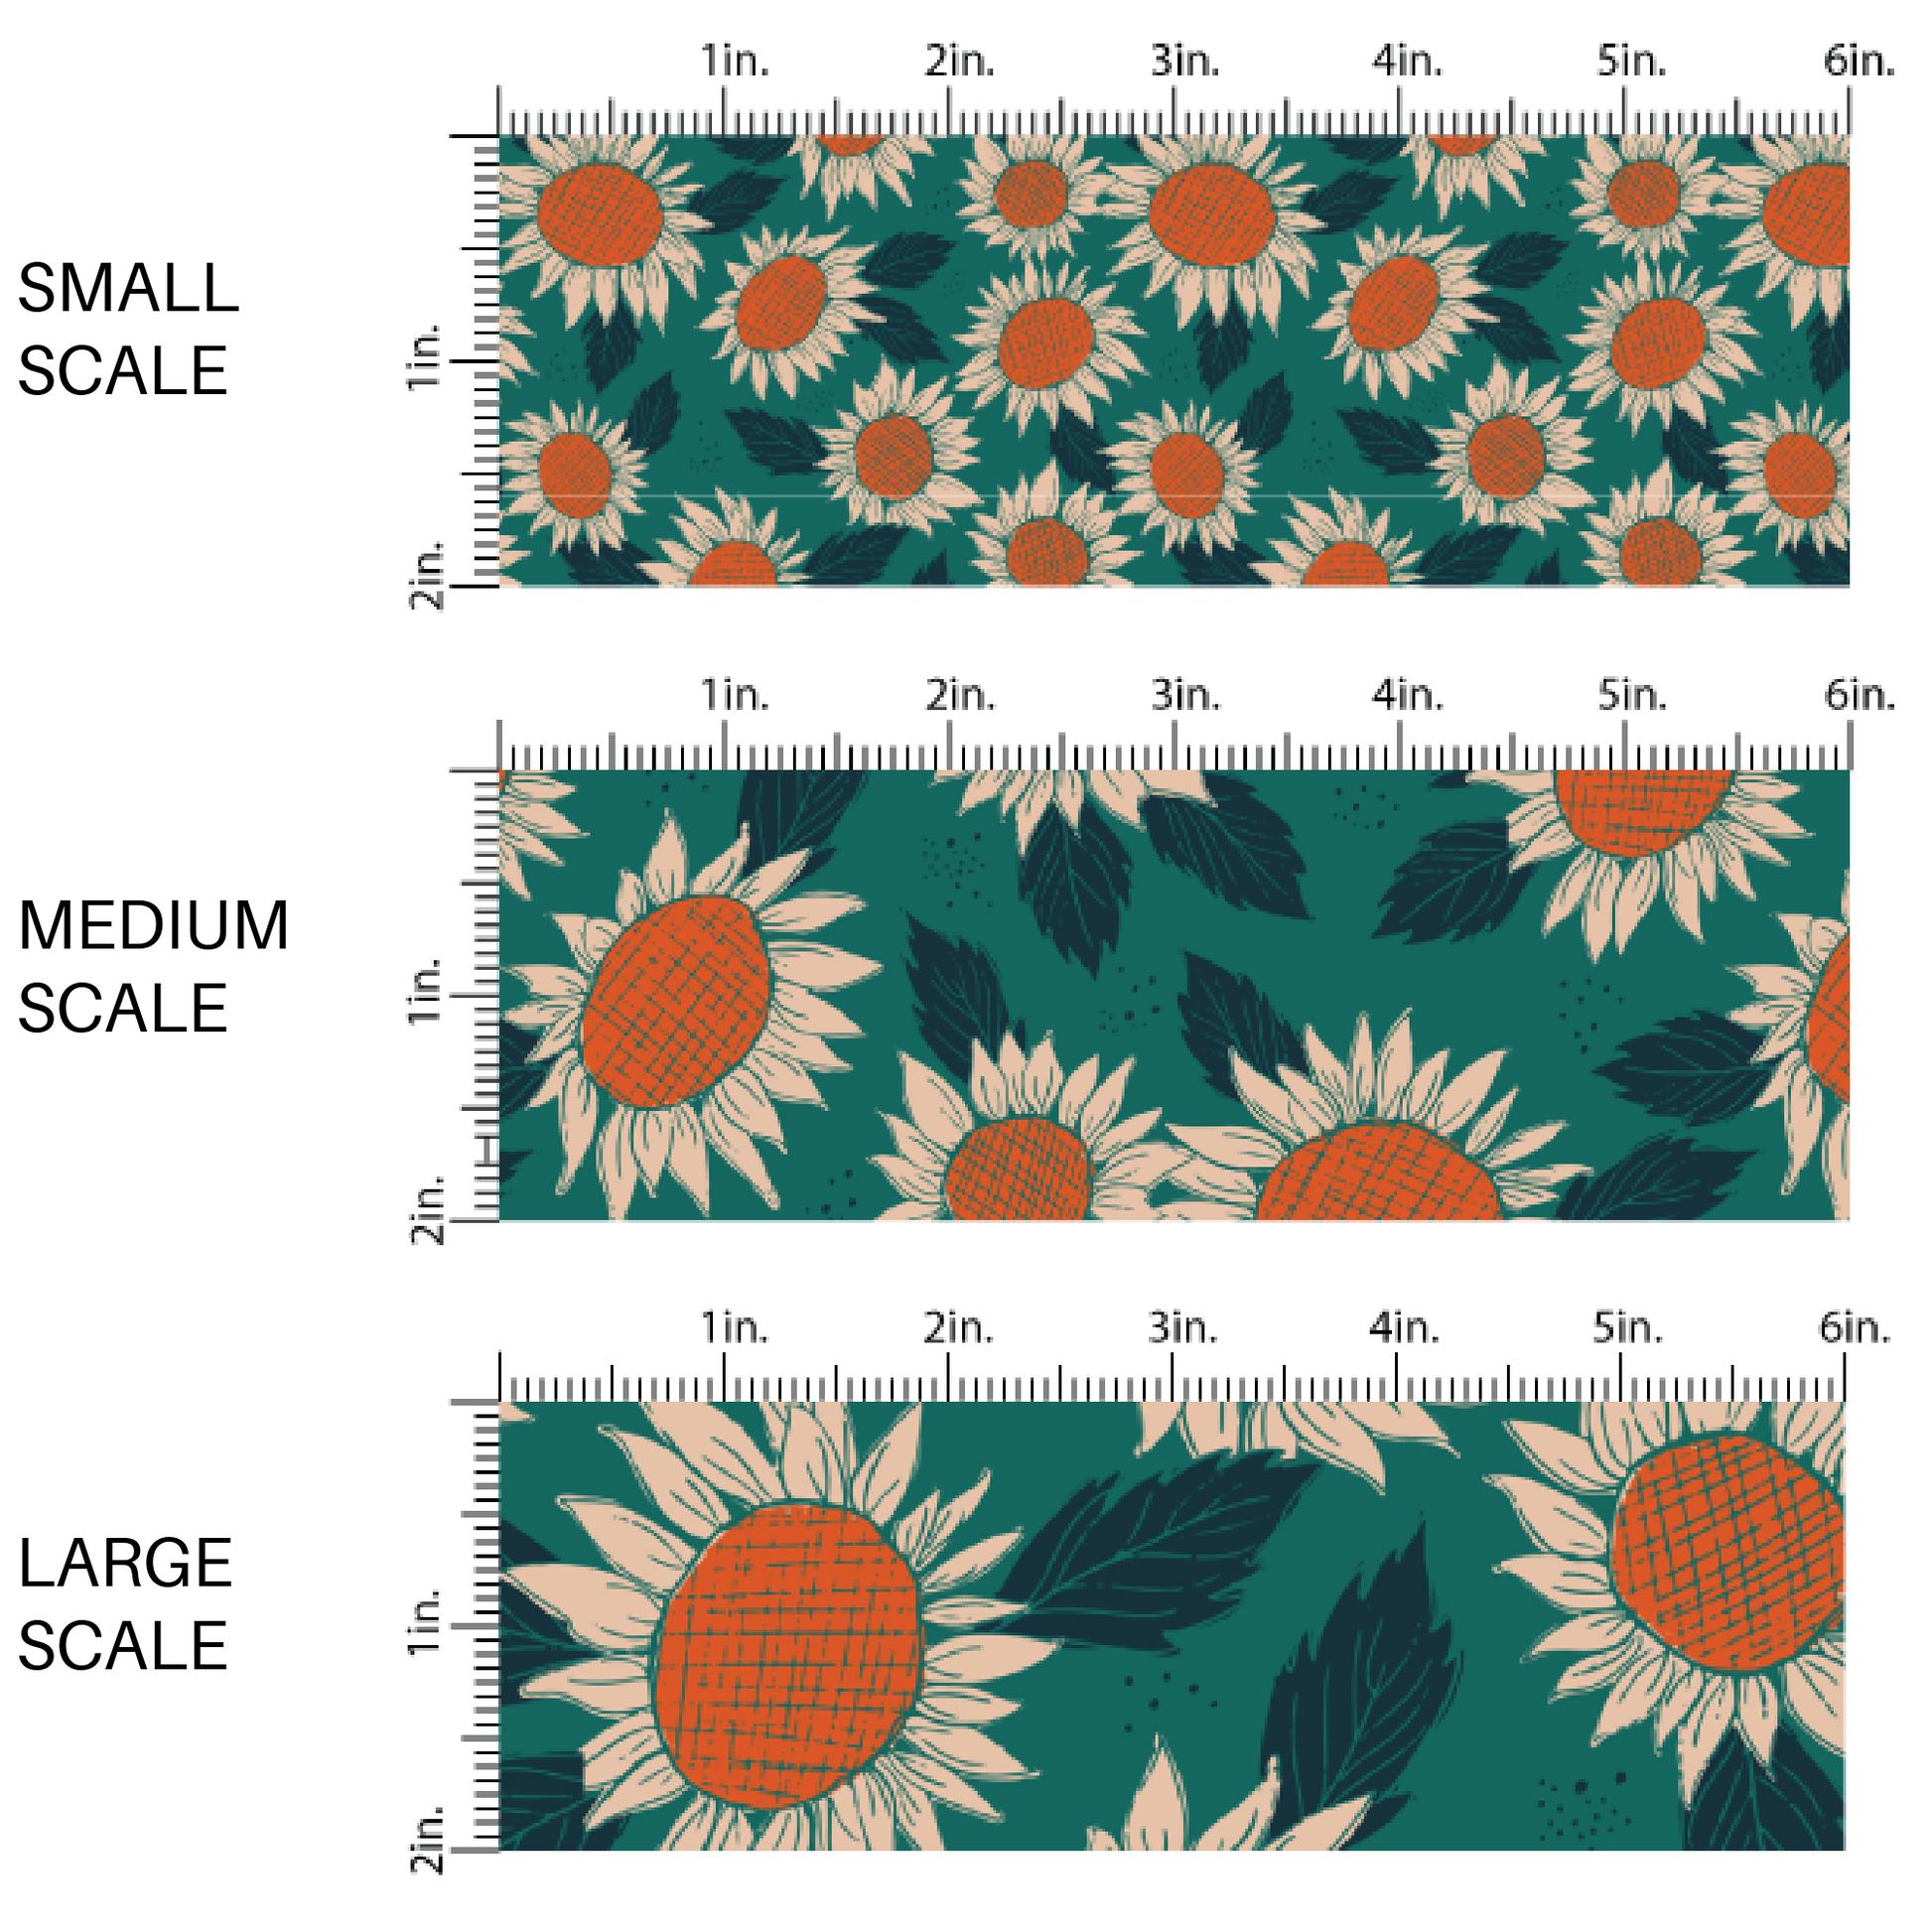 Blue fabric by the yard scaled image guide with neutral colored sunflowers.